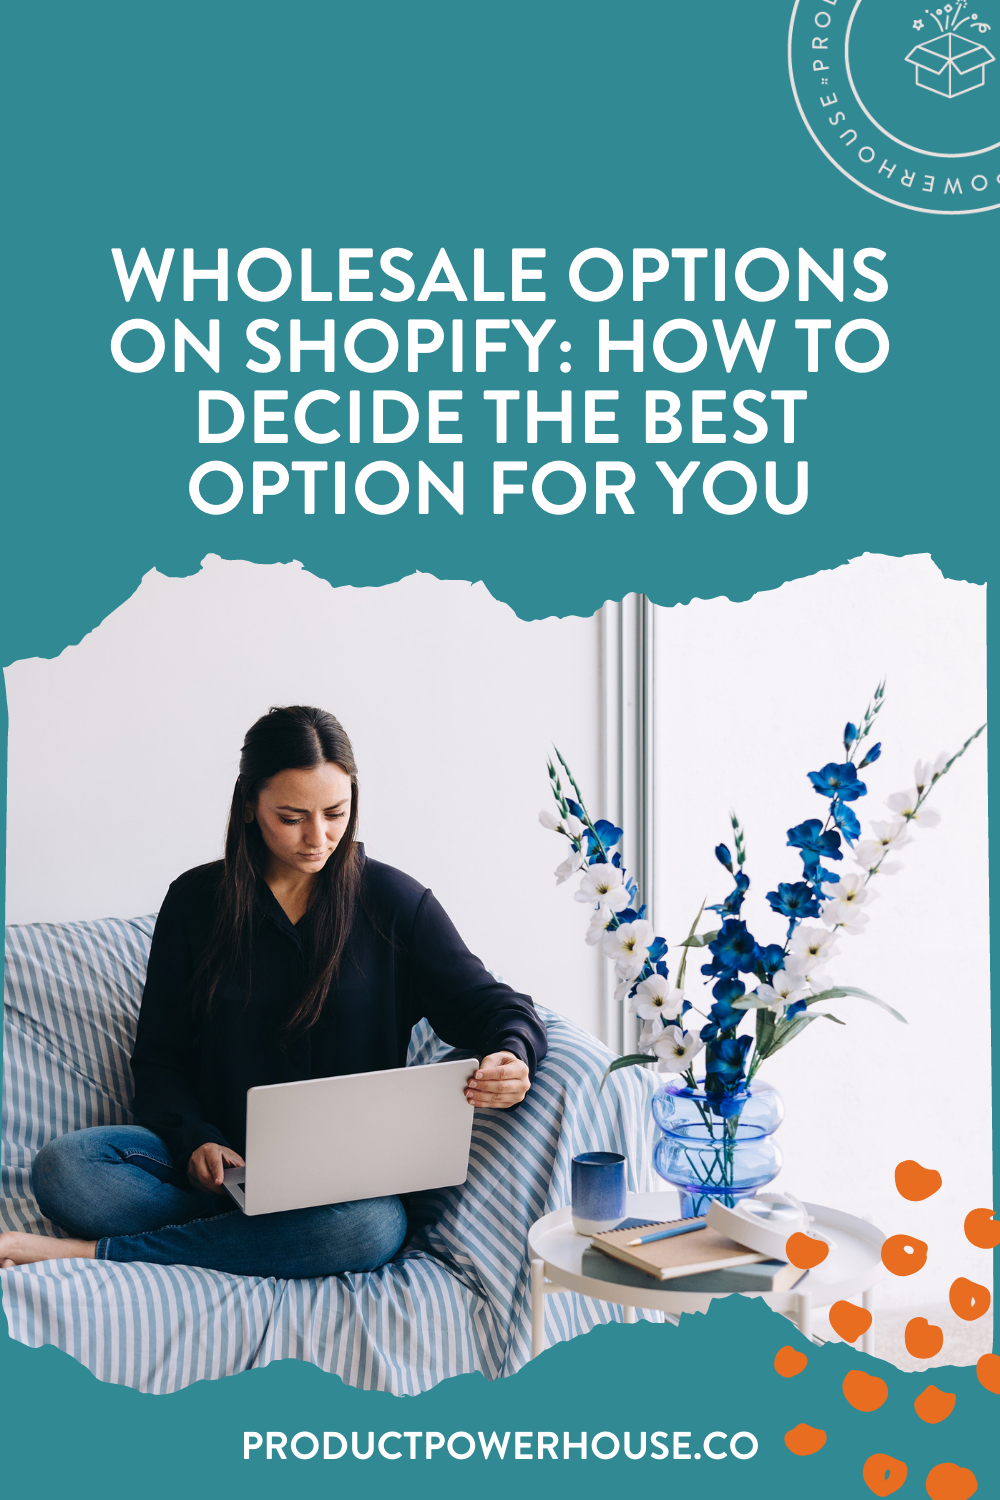 Wholesale Options on Shopify: How to decide the best option for you